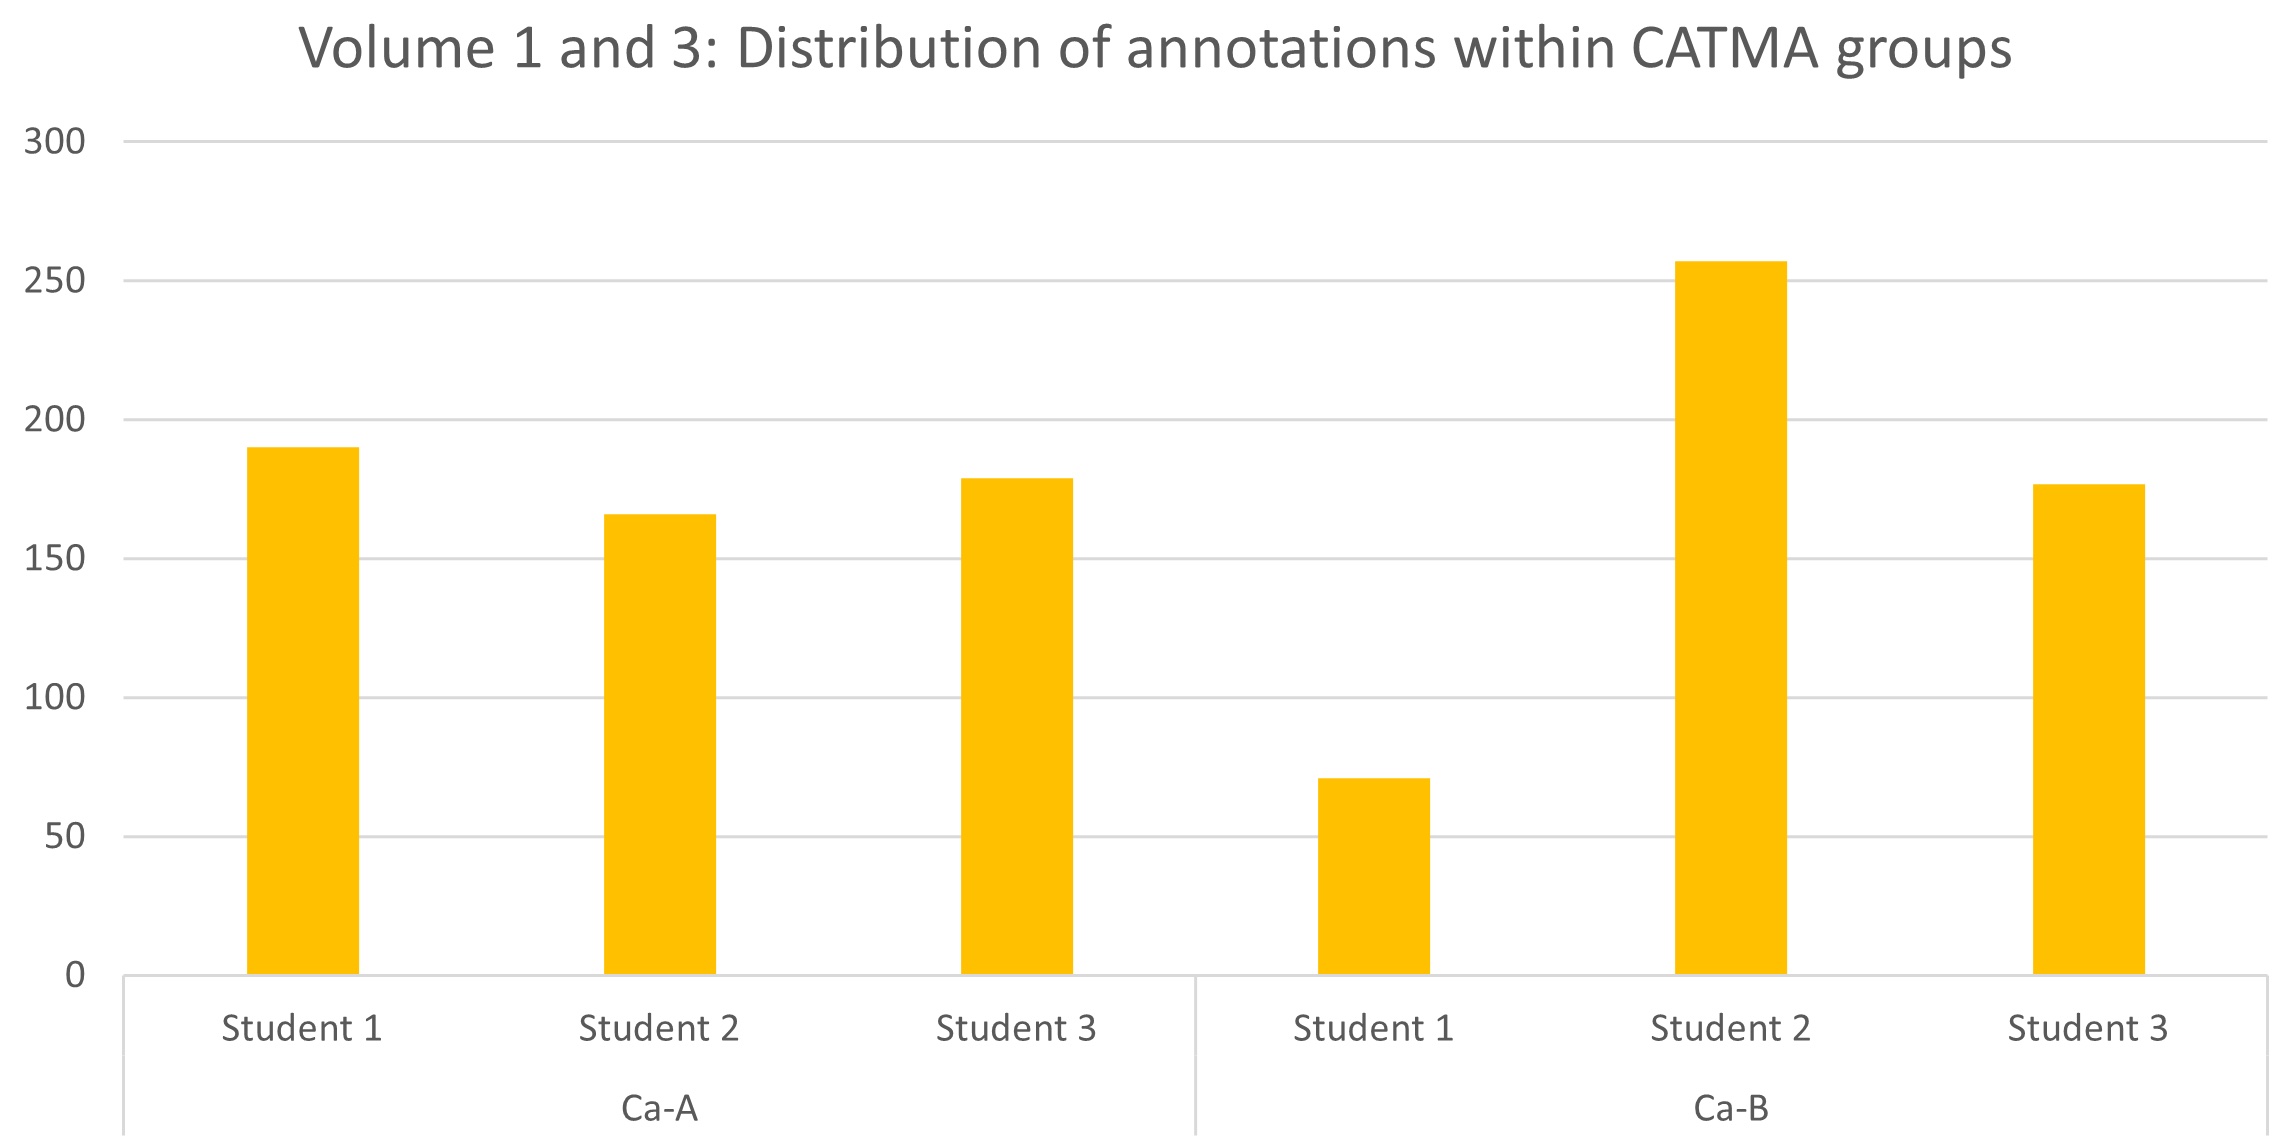 The bar chart shows the number of annotations made by each student within the CATMA groups.The bar chart shows the number of annotations made by each student within the CATMA groups.